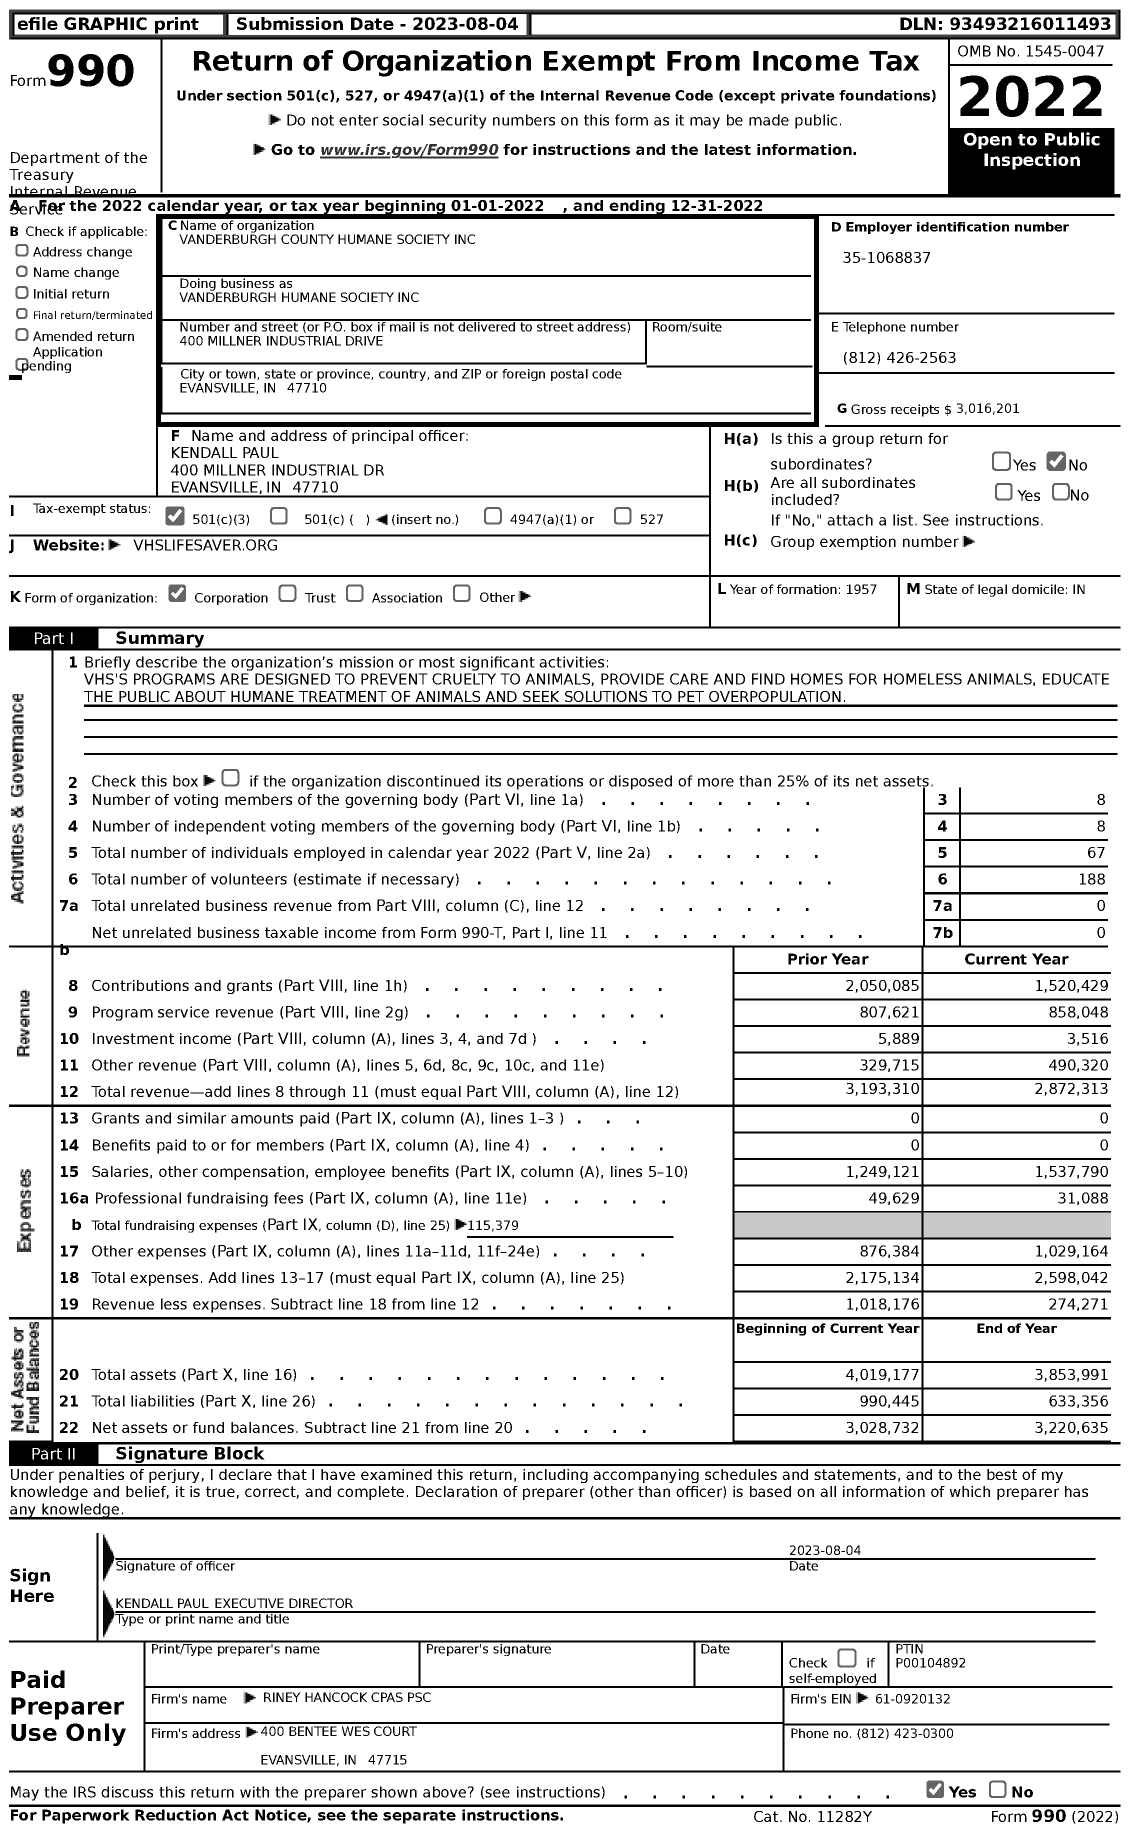 Image of first page of 2022 Form 990 for Vanderburgh Humane Society (VHS)